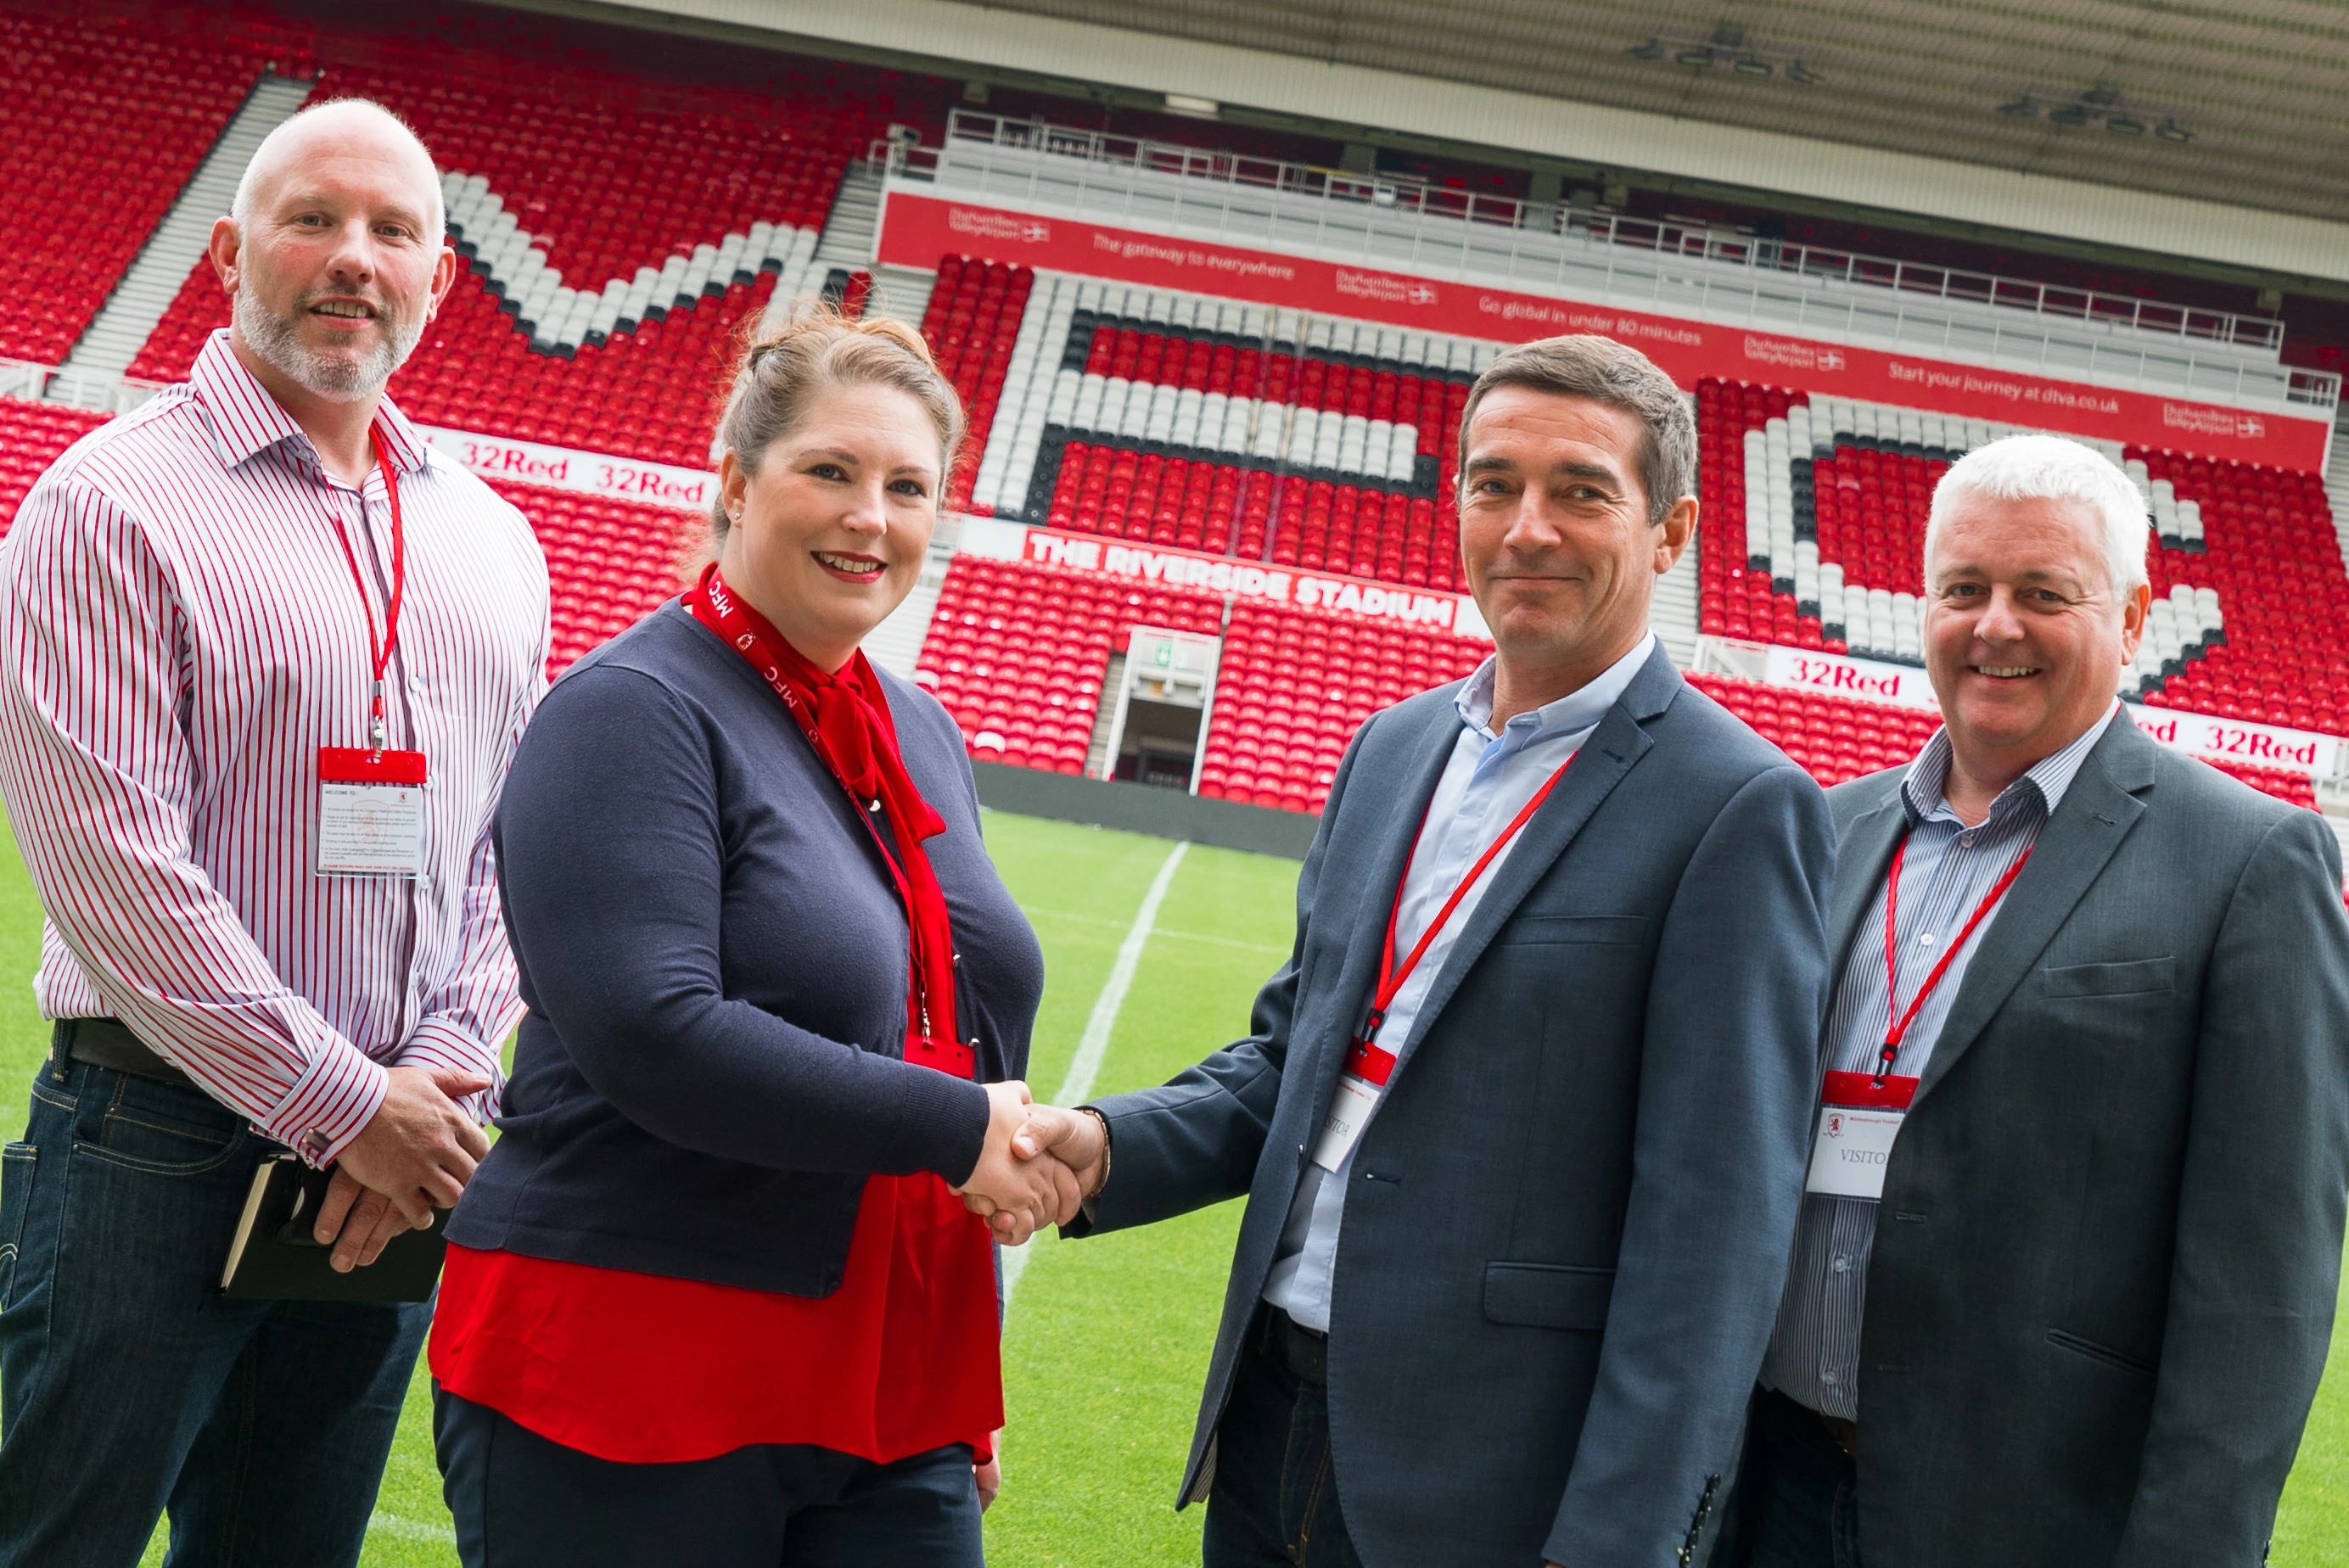 Steven Baker, Food Service Manager, James Munro, Managing Director, and Sales Controller David Mason of Country Valley Foods pictured with Anne-Marie Anderson of MFC Foundation at Boro's Riverside Stadium